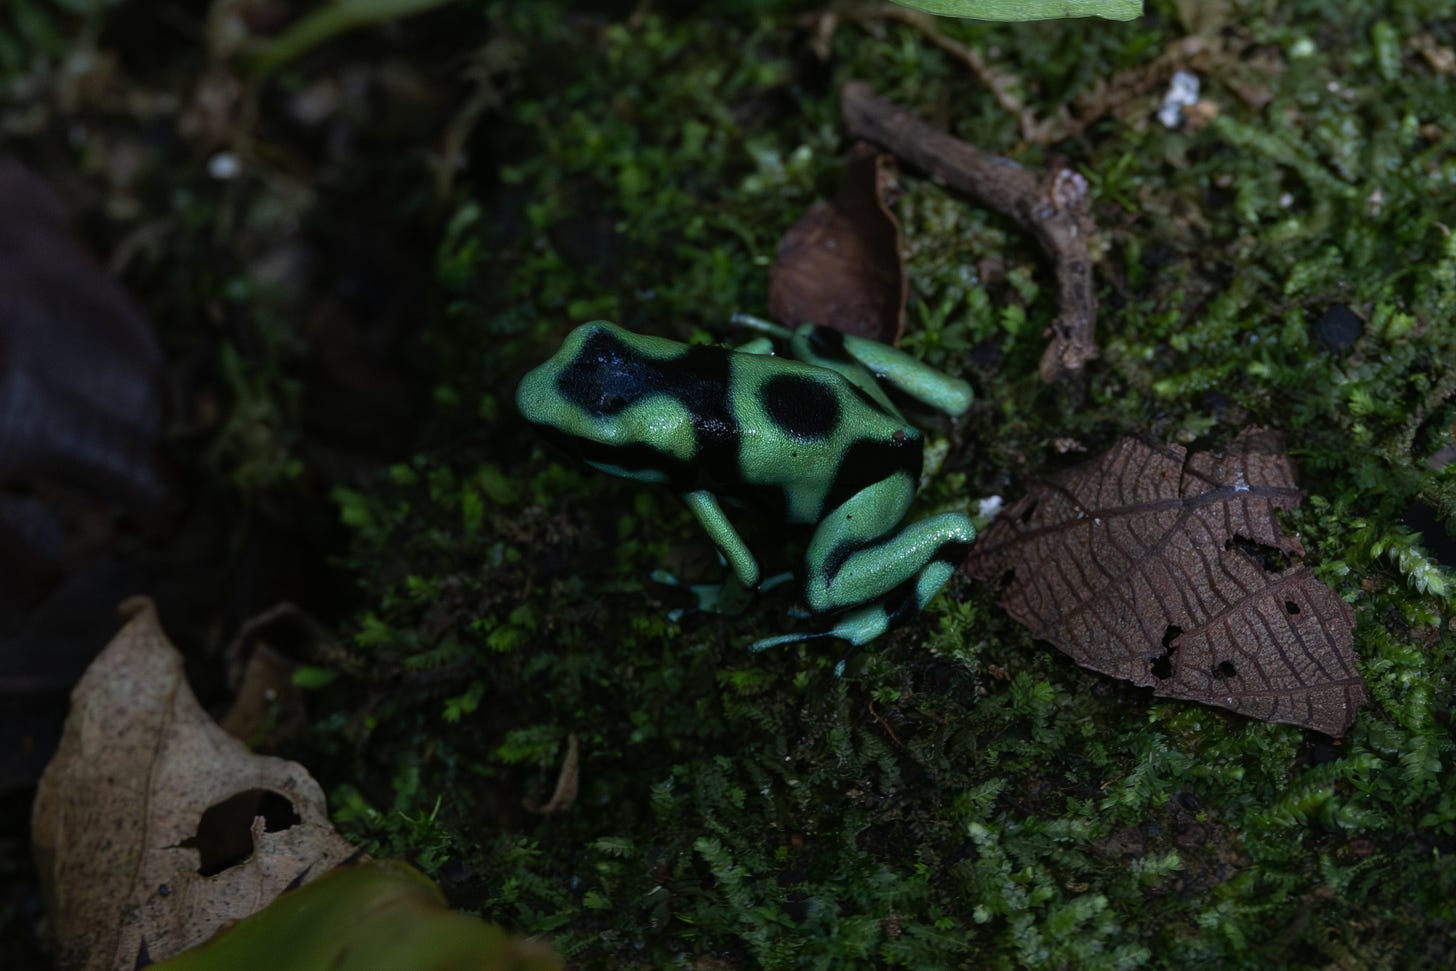 a mint green-colored frog with a pattern of black markings (a black circleo n its back, a black band on its nape which connects to a black cap) sitting on moss facing left